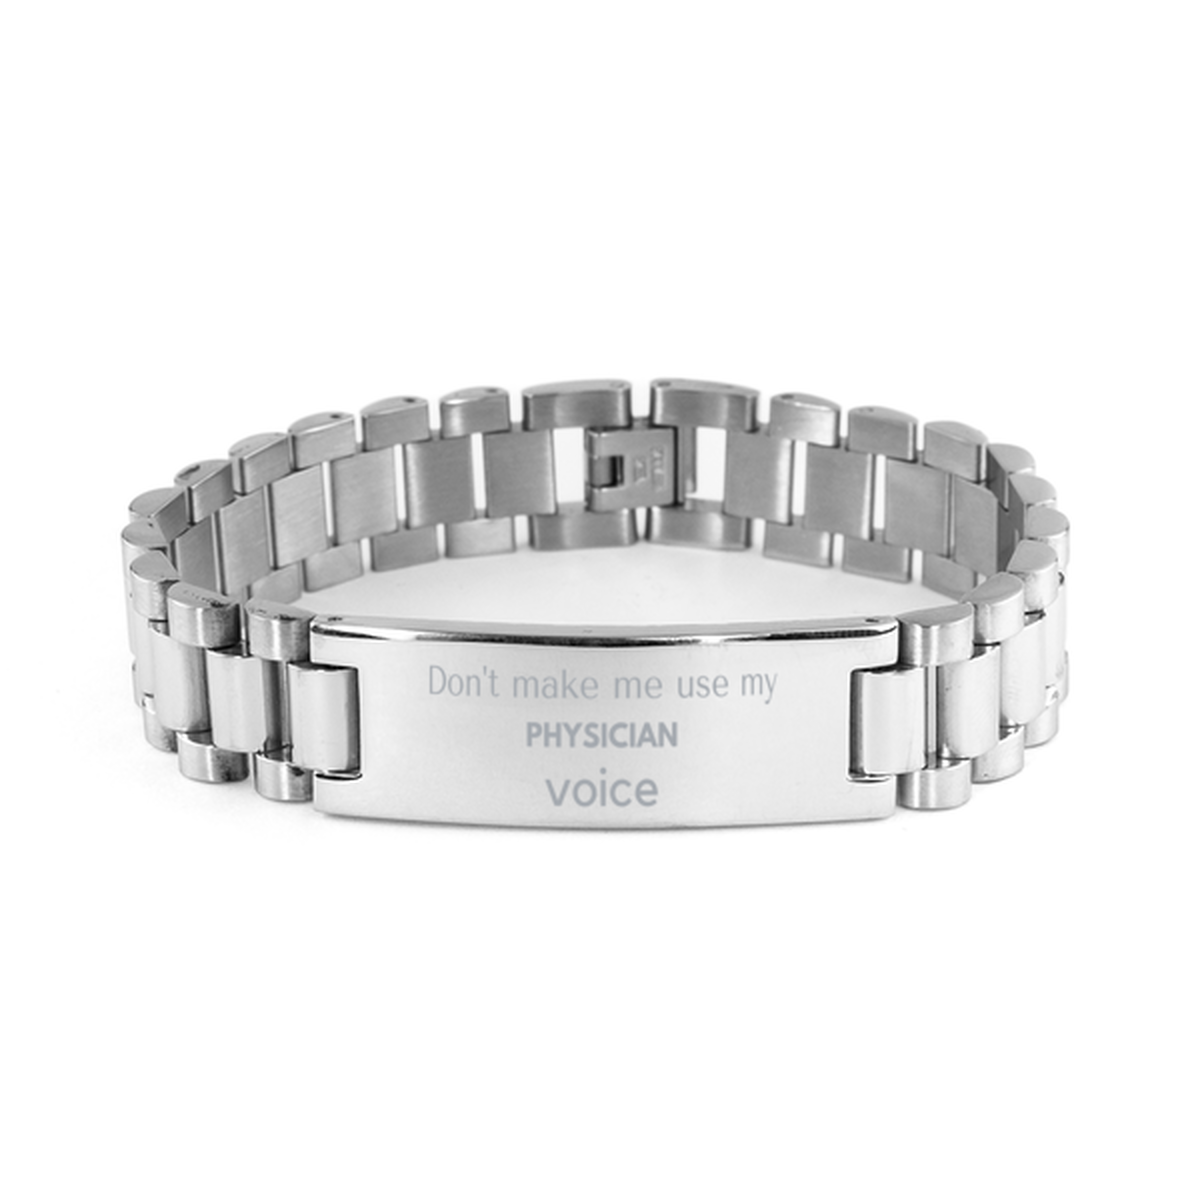 Don't make me use my Physician voice, Sarcasm Physician Gifts, Christmas Physician Ladder Stainless Steel Bracelet Birthday Unique Gifts For Physician Coworkers, Men, Women, Colleague, Friends